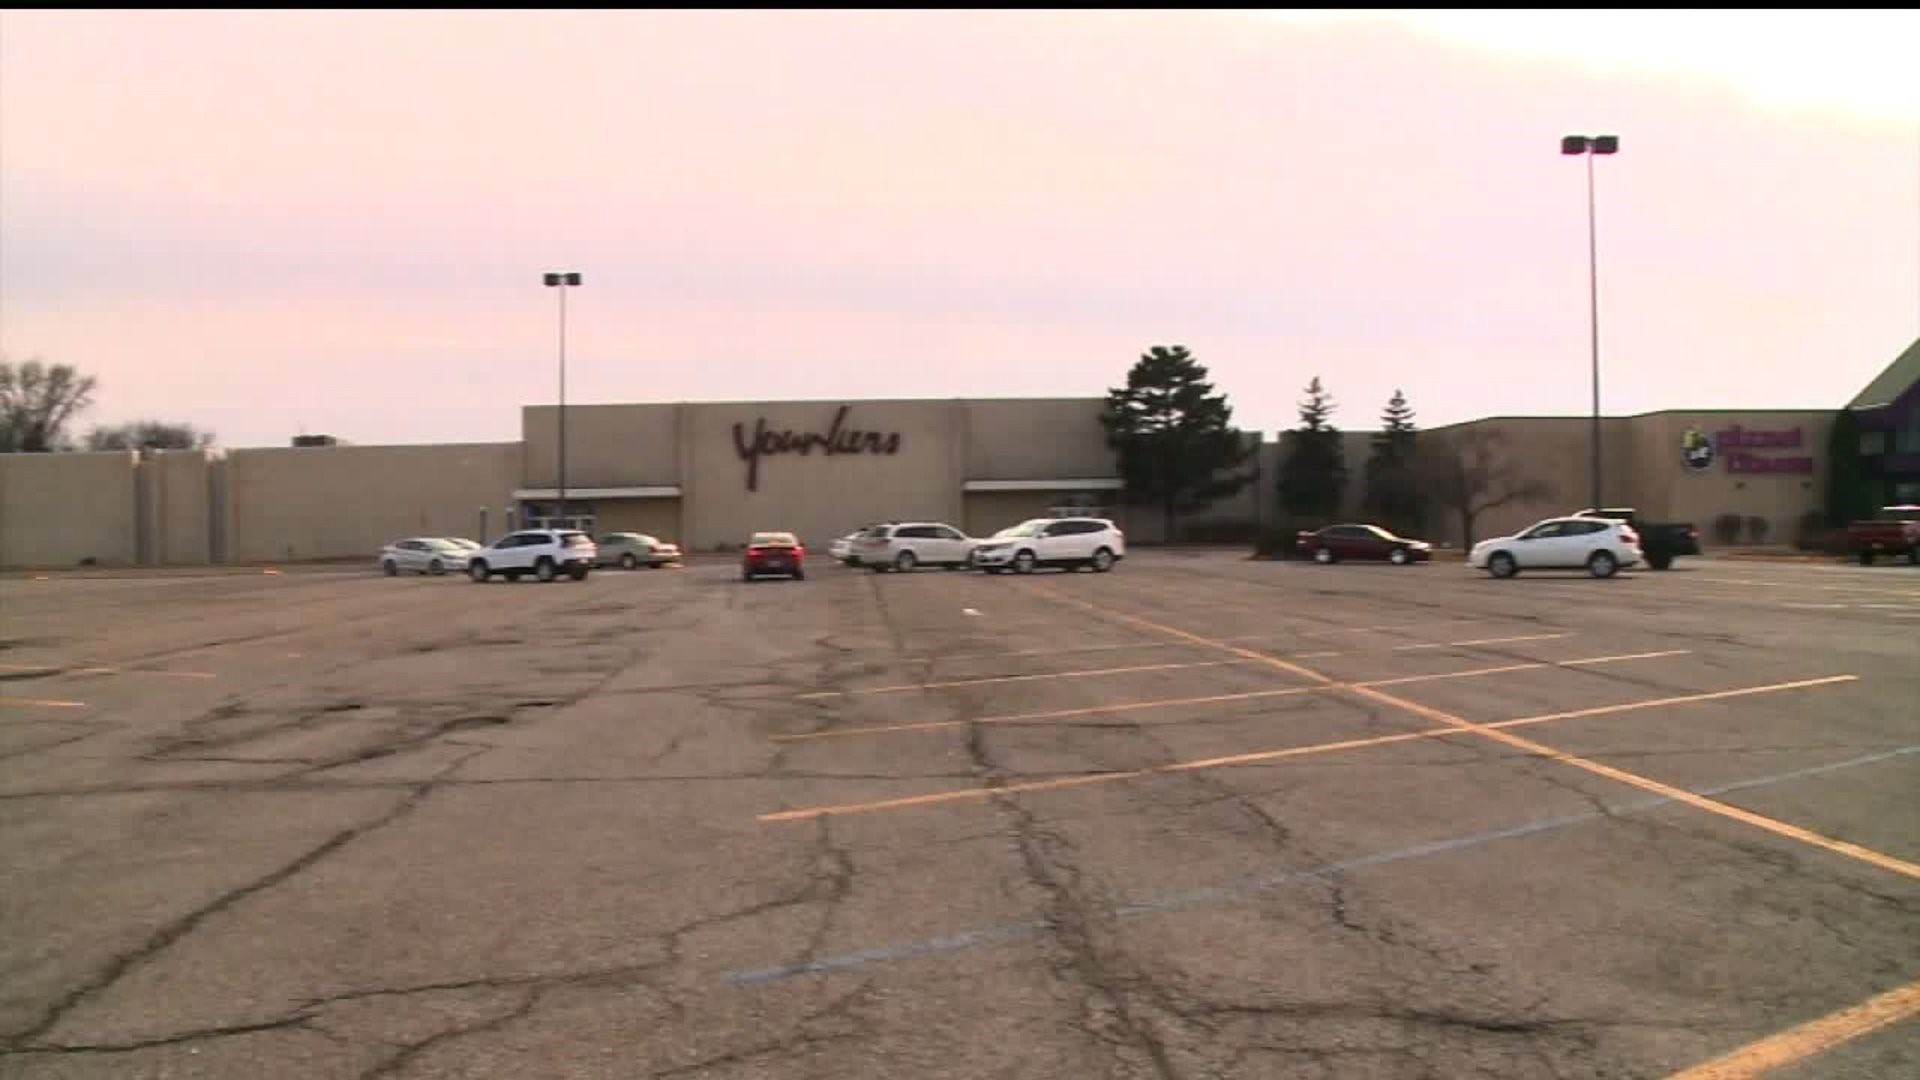 Younkers to close some stores in Iowa